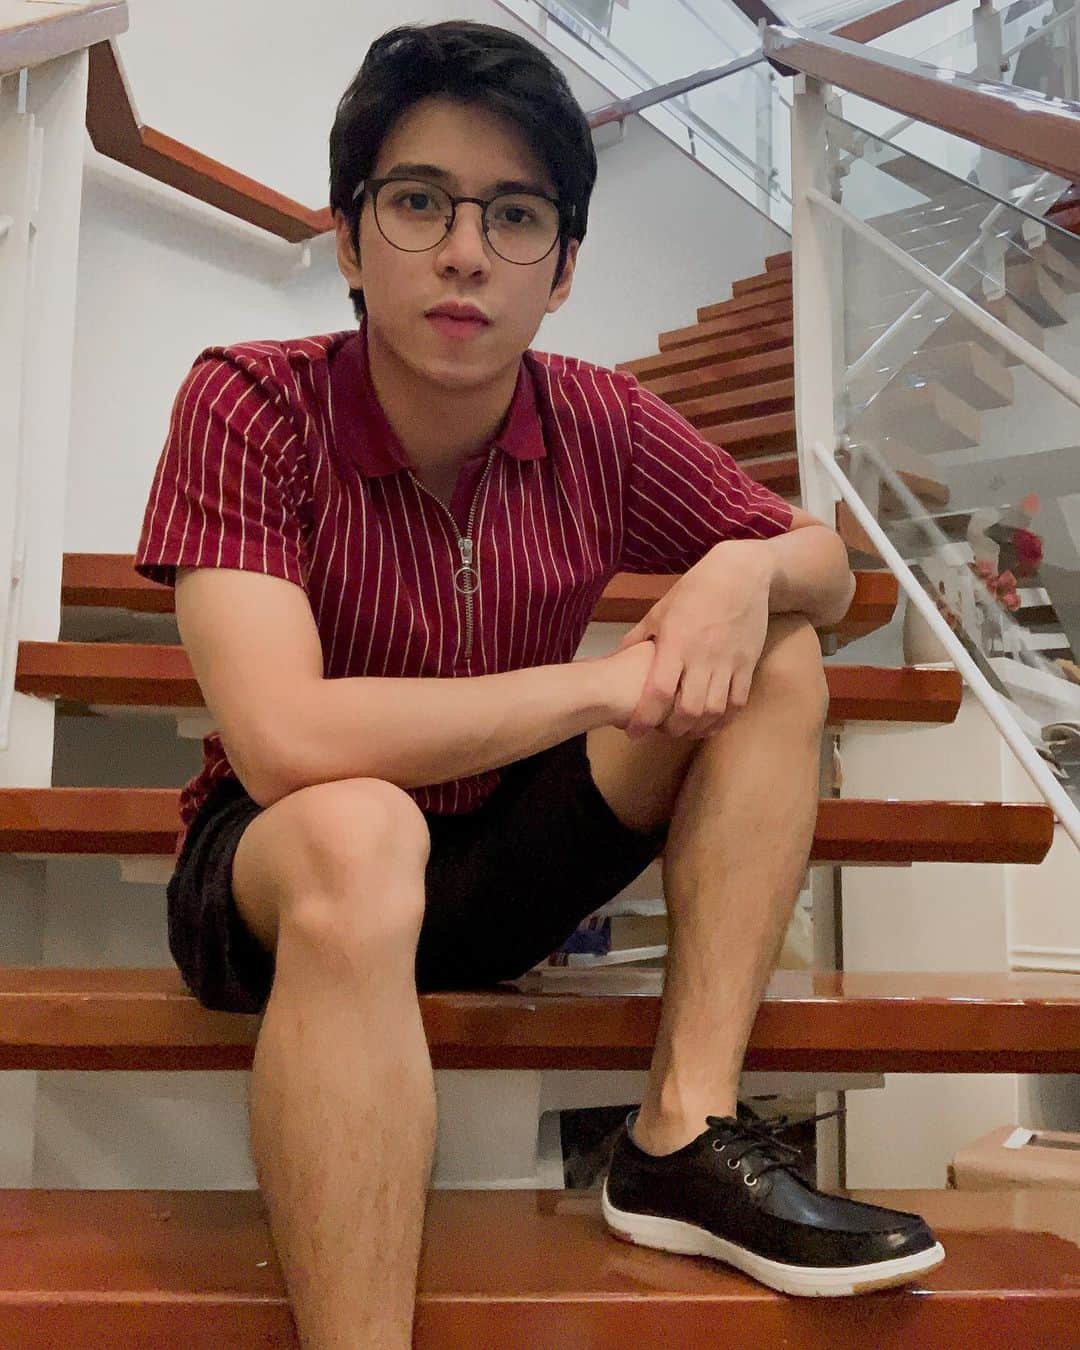 Nash Aguasのインスタグラム：「New favorite shoes from @figliauomo !! Comfy and stylish👌🏻」